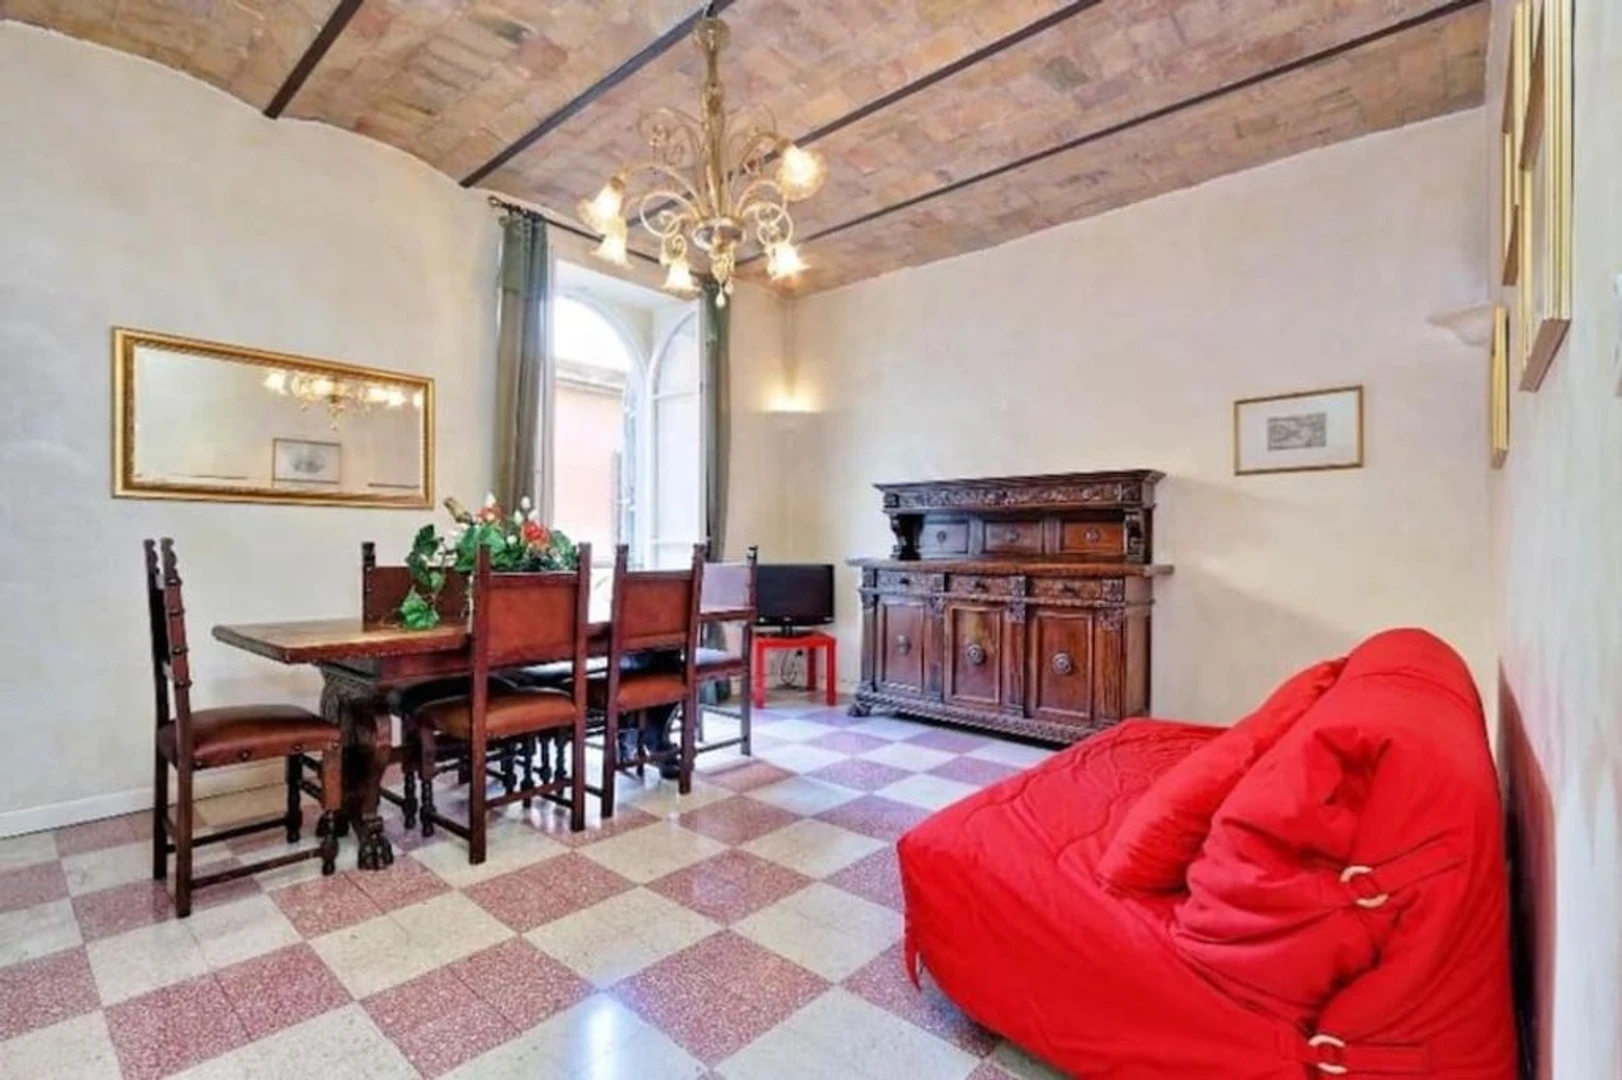 Studio for 2 people in Rome